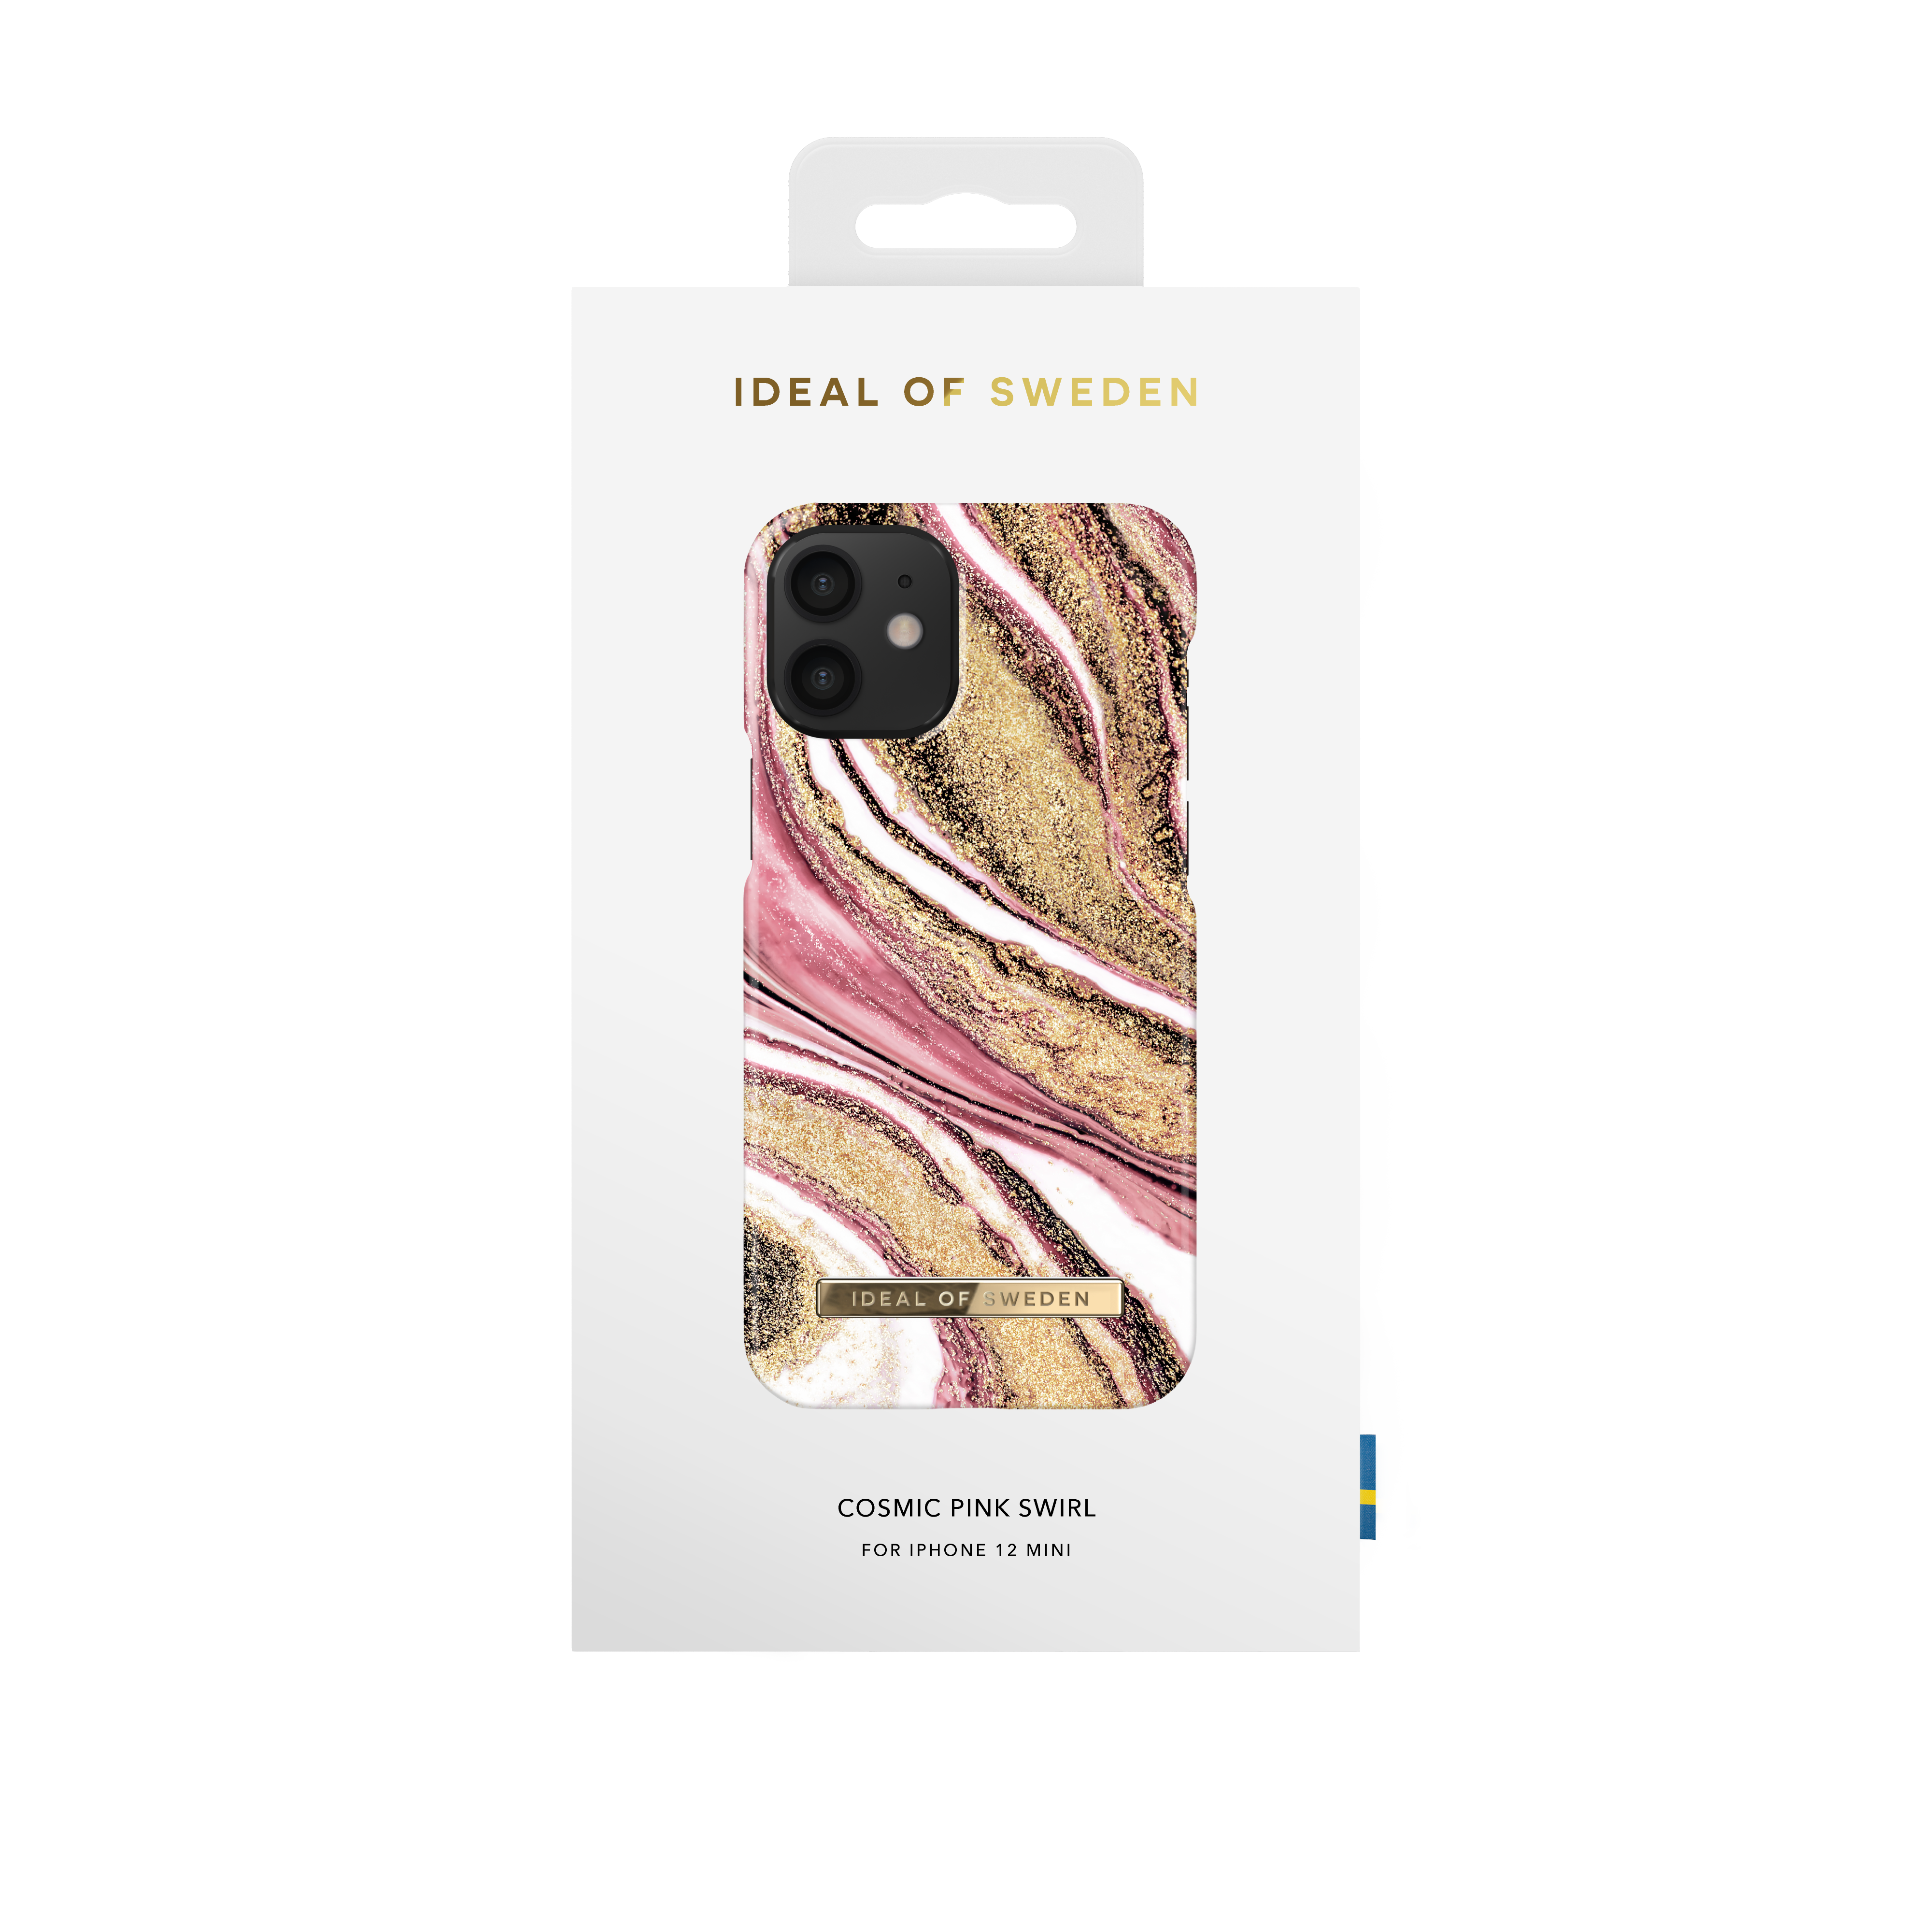 IDFCSS20-I2054-193, Mini, IDEAL Apple, SWEDEN Cosmic 12 Swirl Backcover, IPhone OF Pink